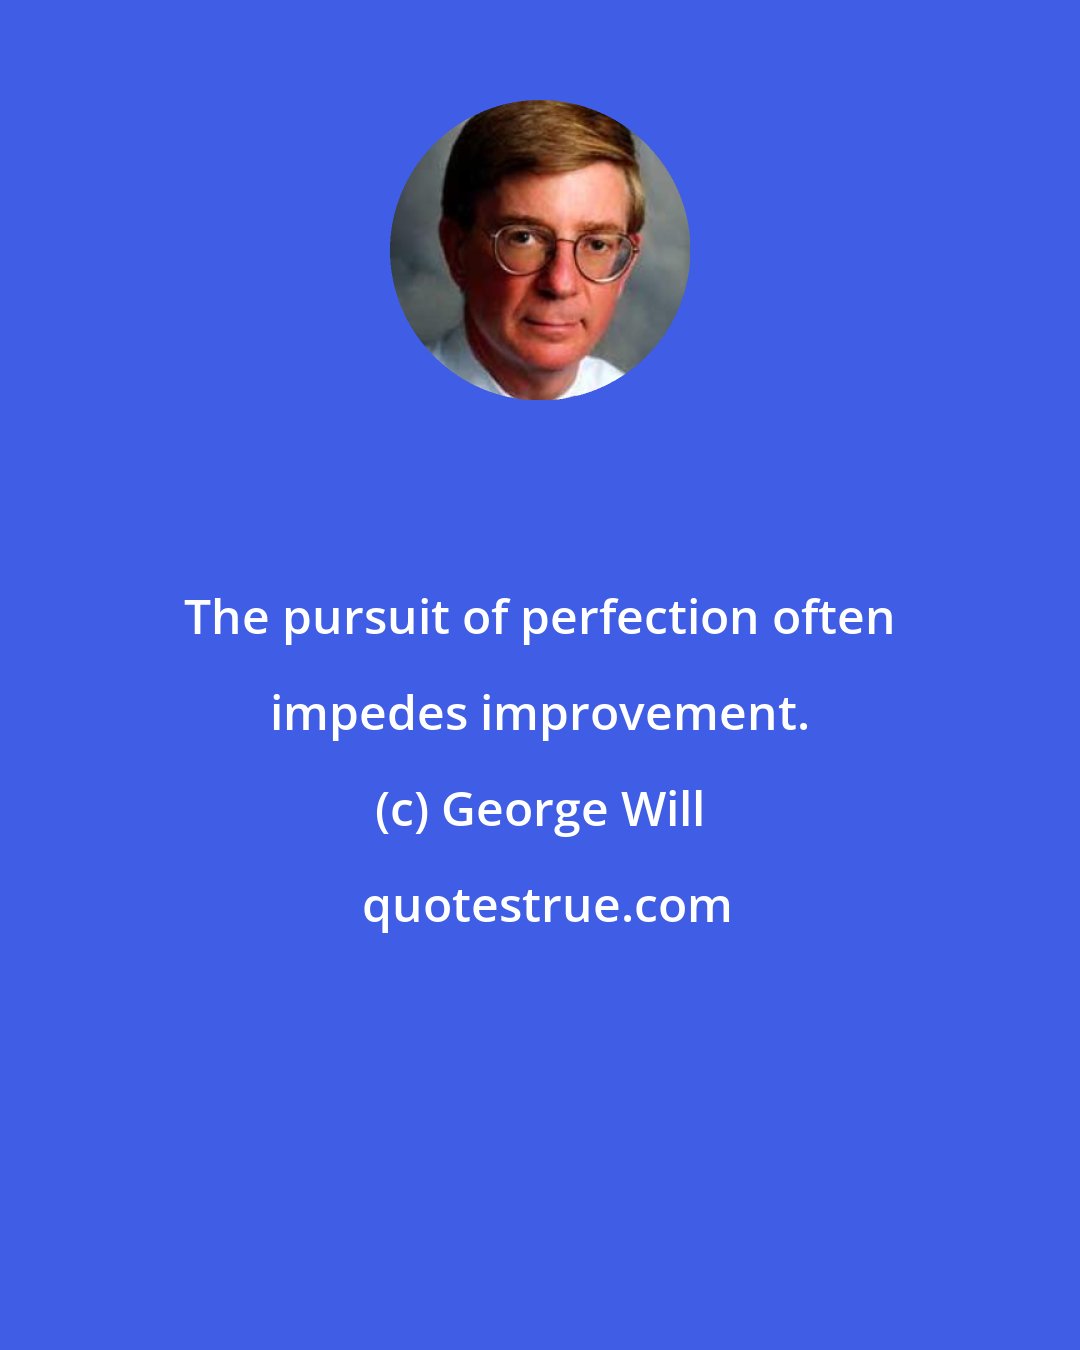 George Will: The pursuit of perfection often impedes improvement.